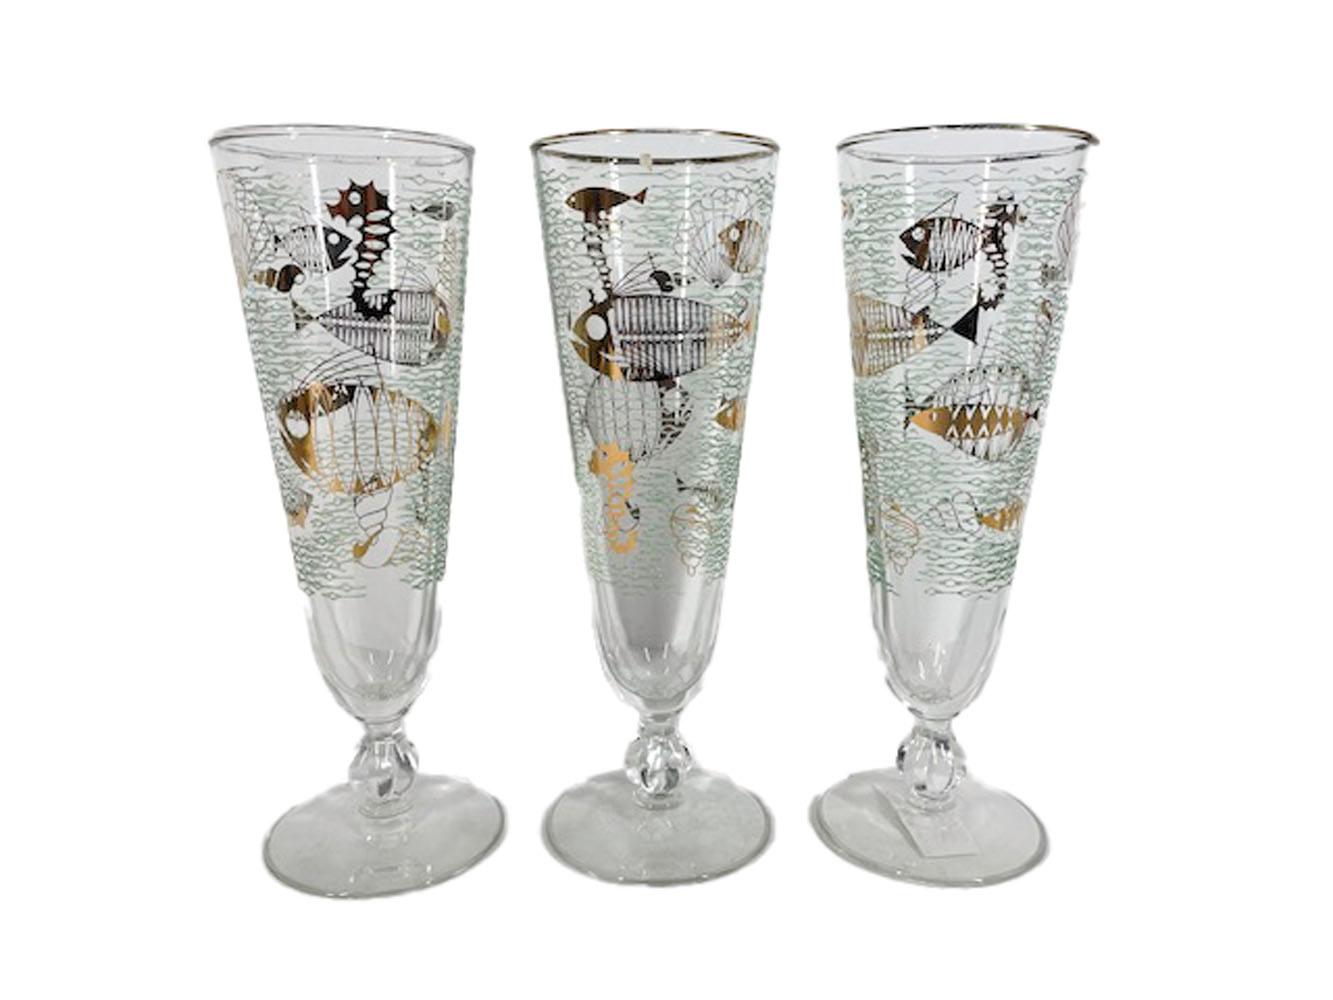 American Vintage Libbey Glass Pilsner Glasses in the Marine Life Pattern